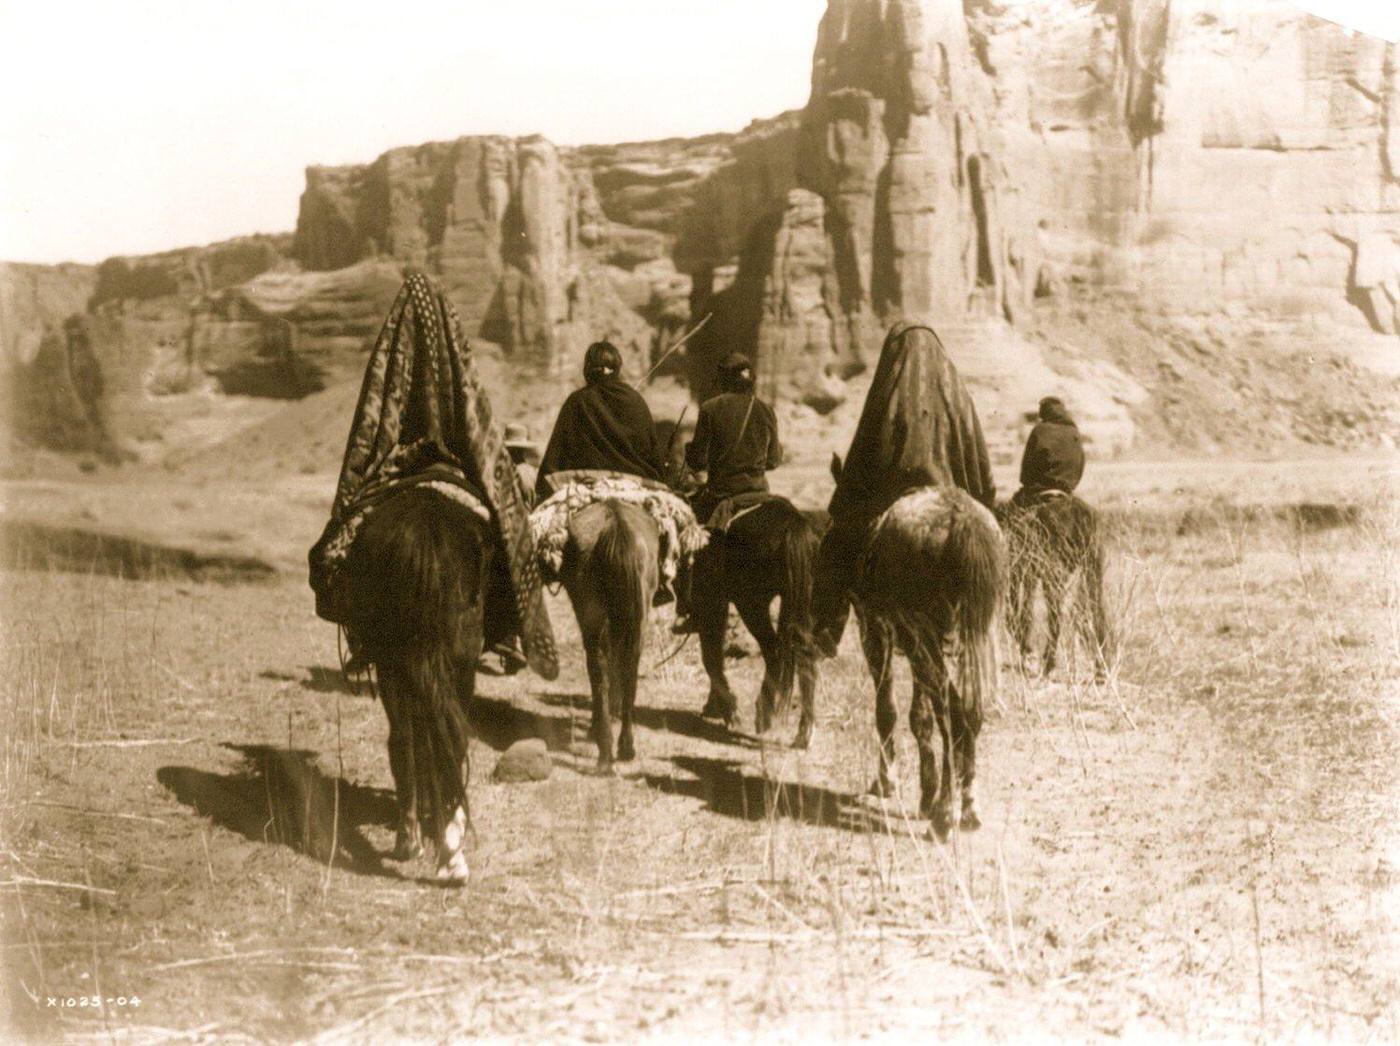 Rear view of Navajo Indians on horseback making their way over the sparse, dry, grassy floor of Tesacod Canyon, 1905